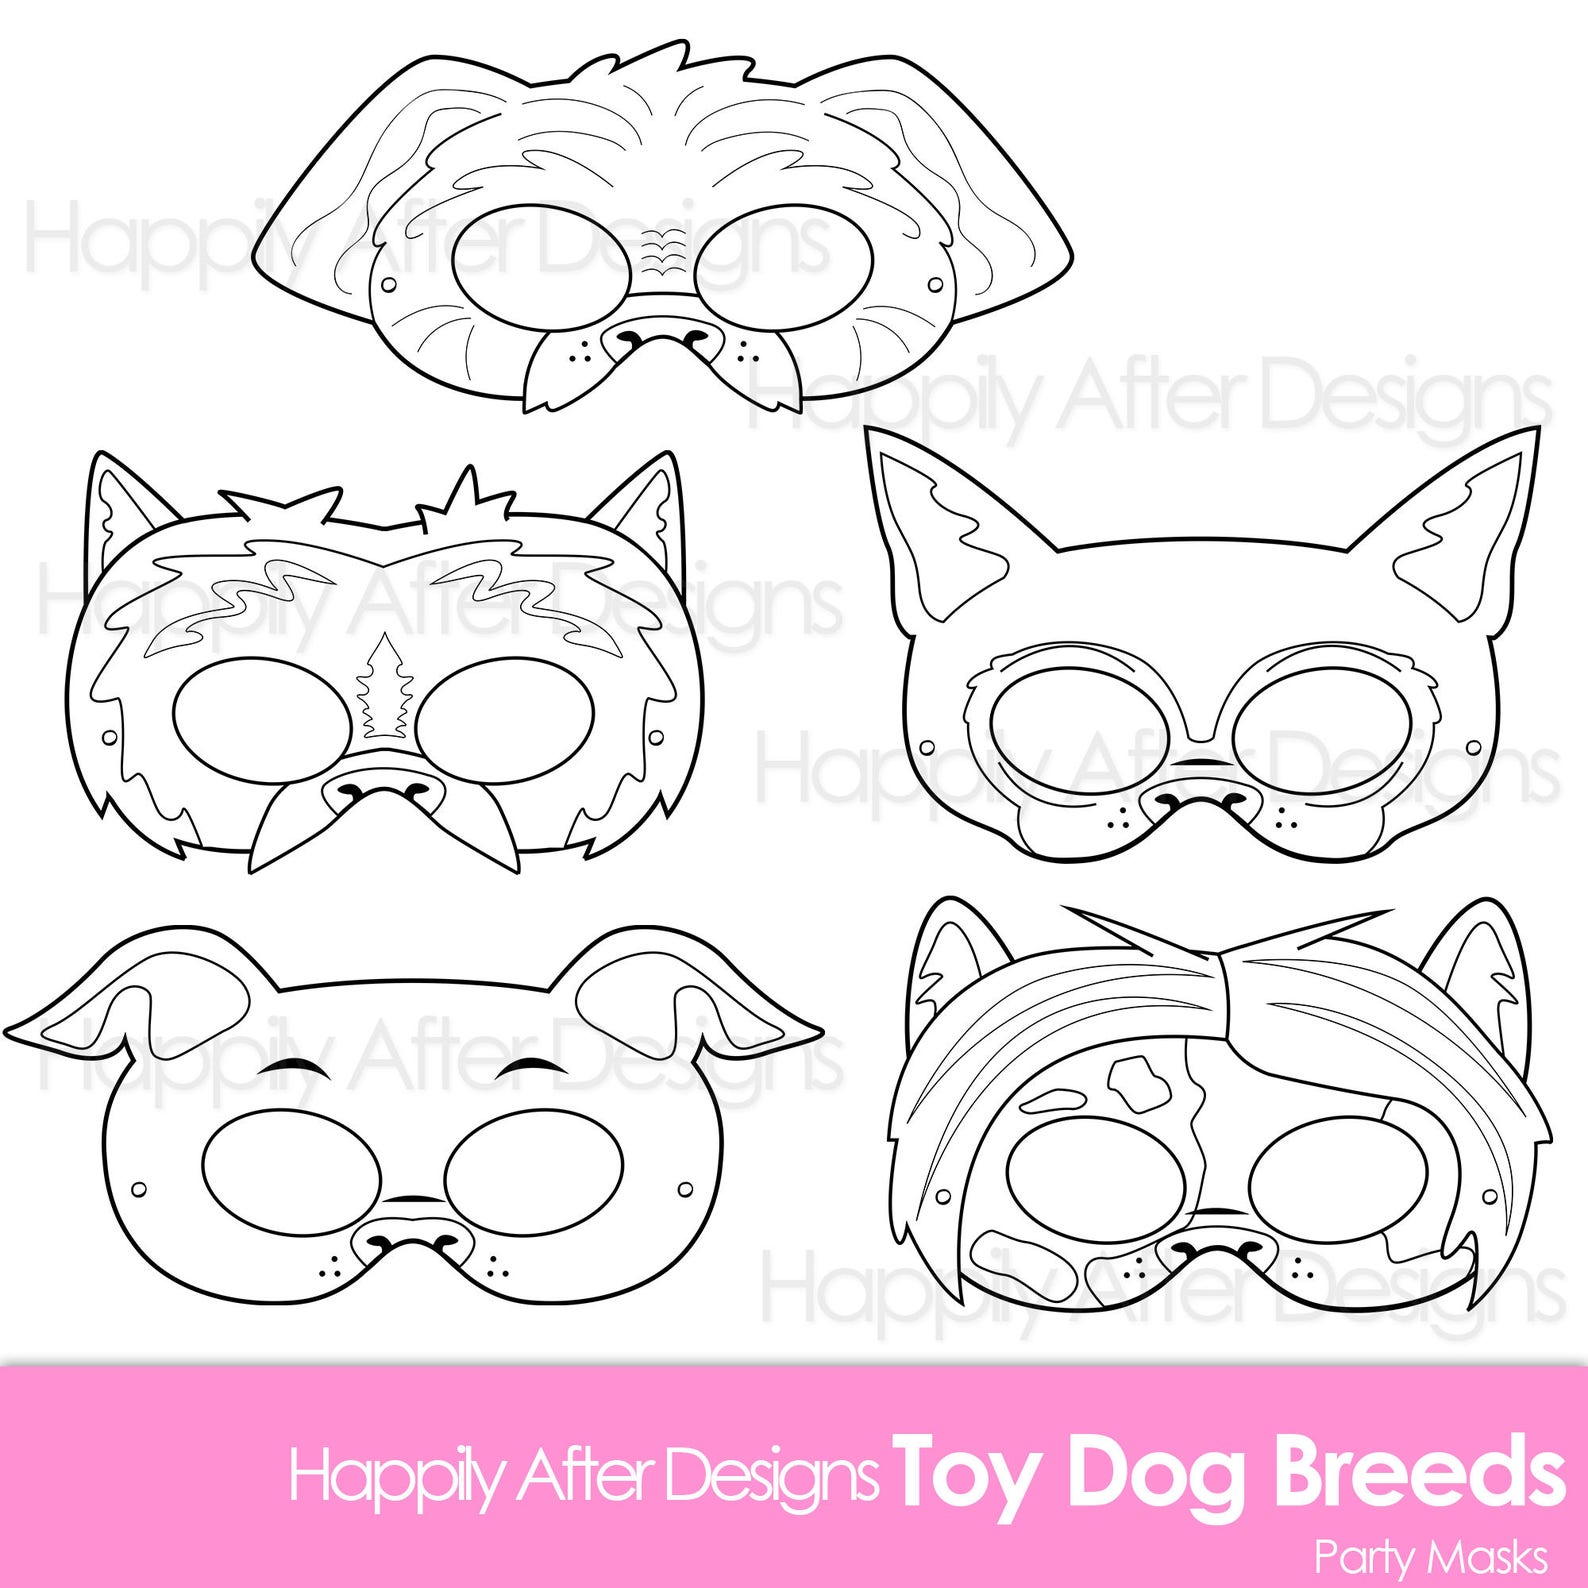 Toy Dog Breed Printable Coloring Masks, Chihuahua Mask, Chinese Crested ...